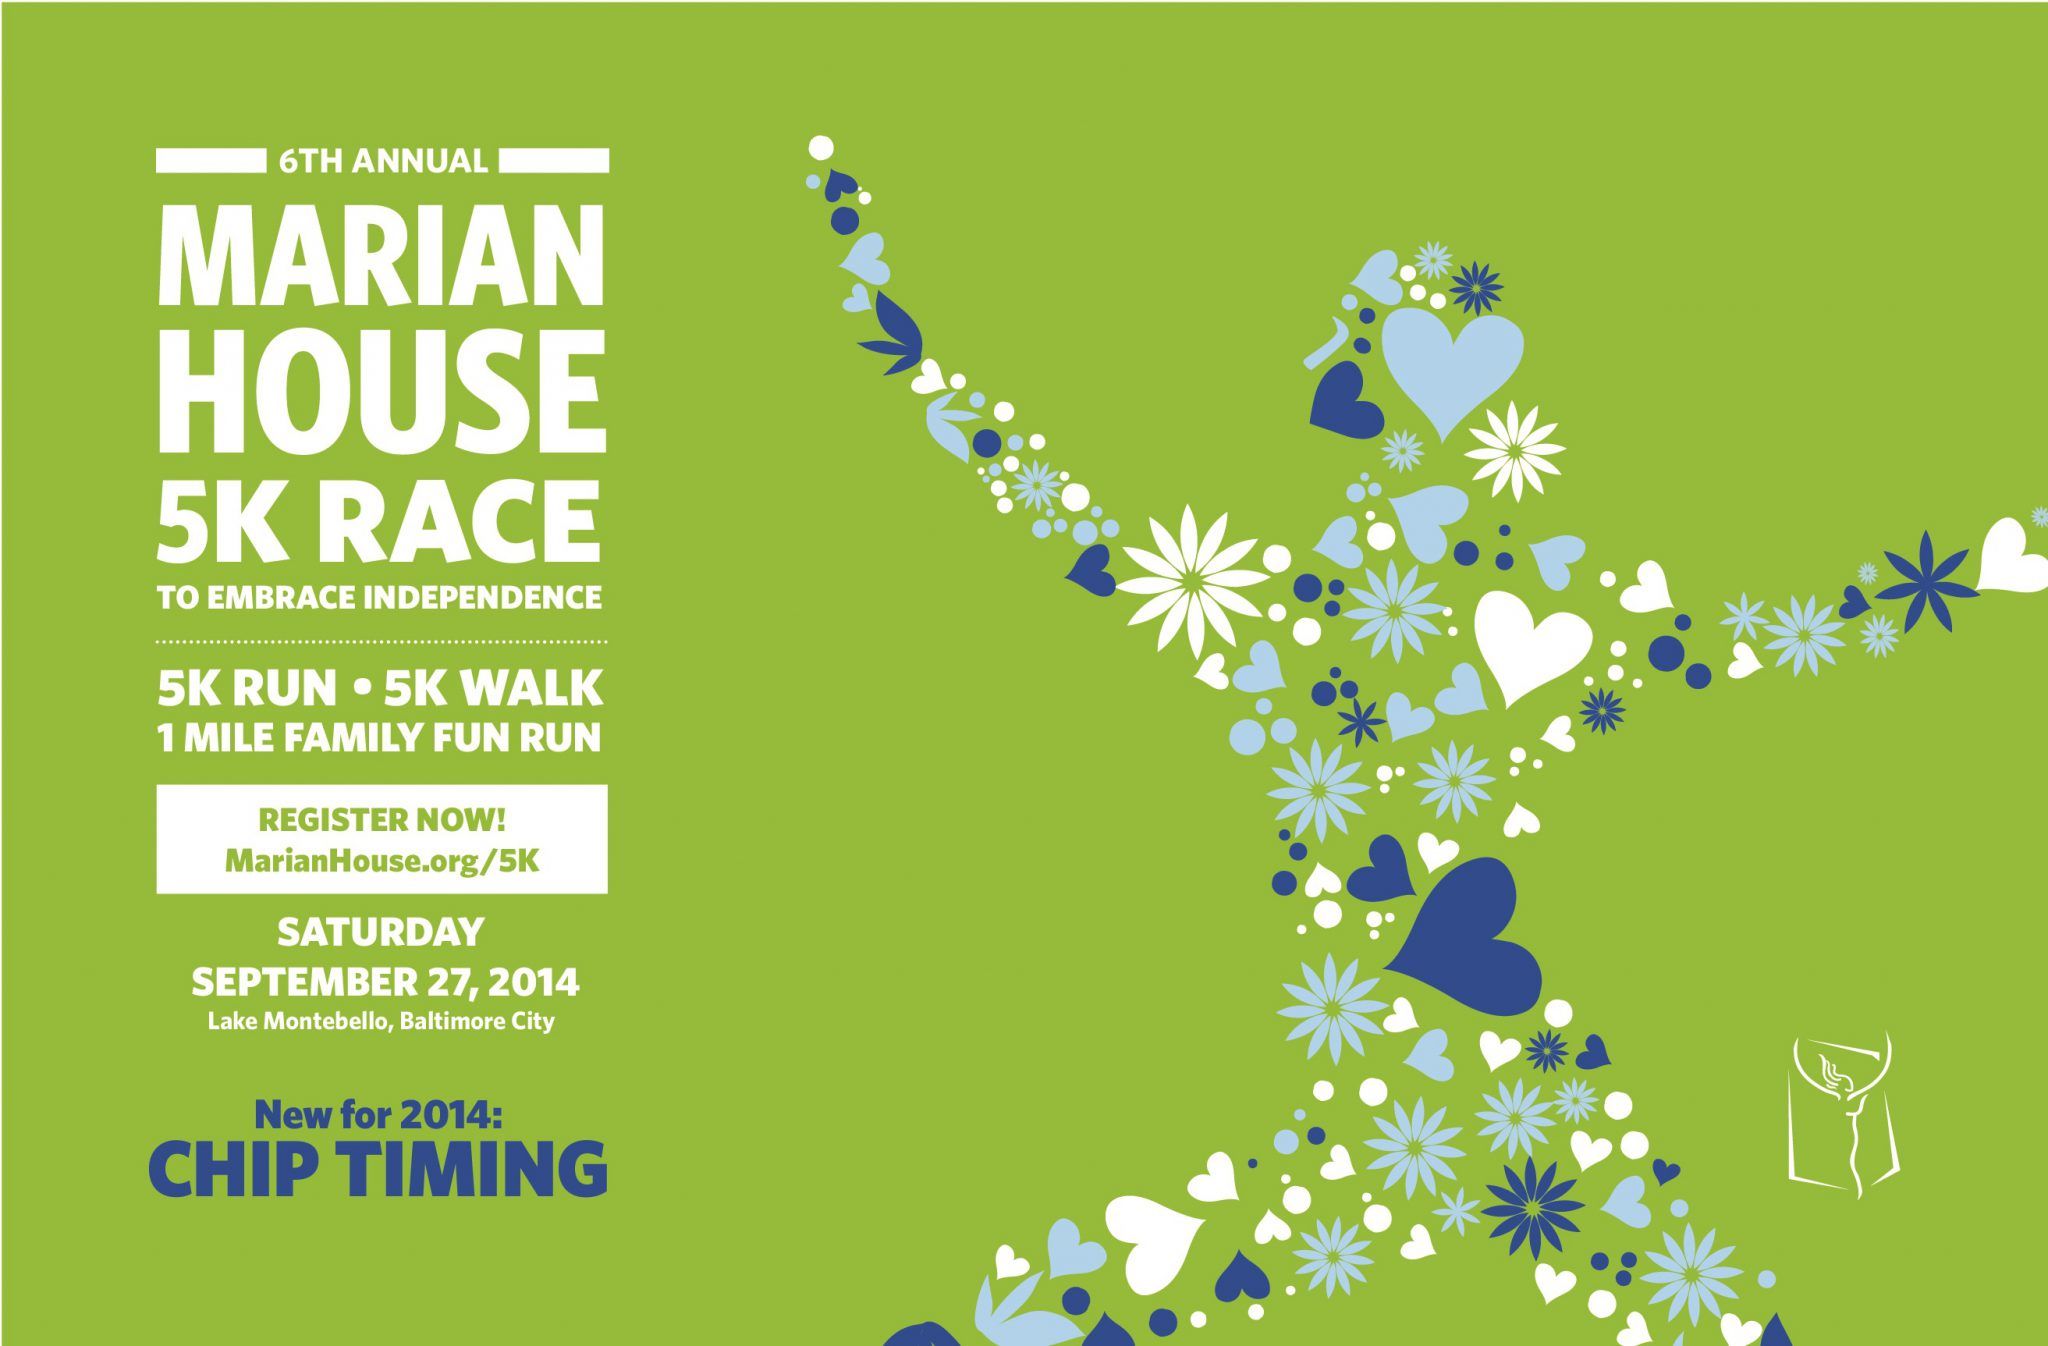 6th Annual Marian House Race to Embrace Independence 5K Run and Walk on 9/27